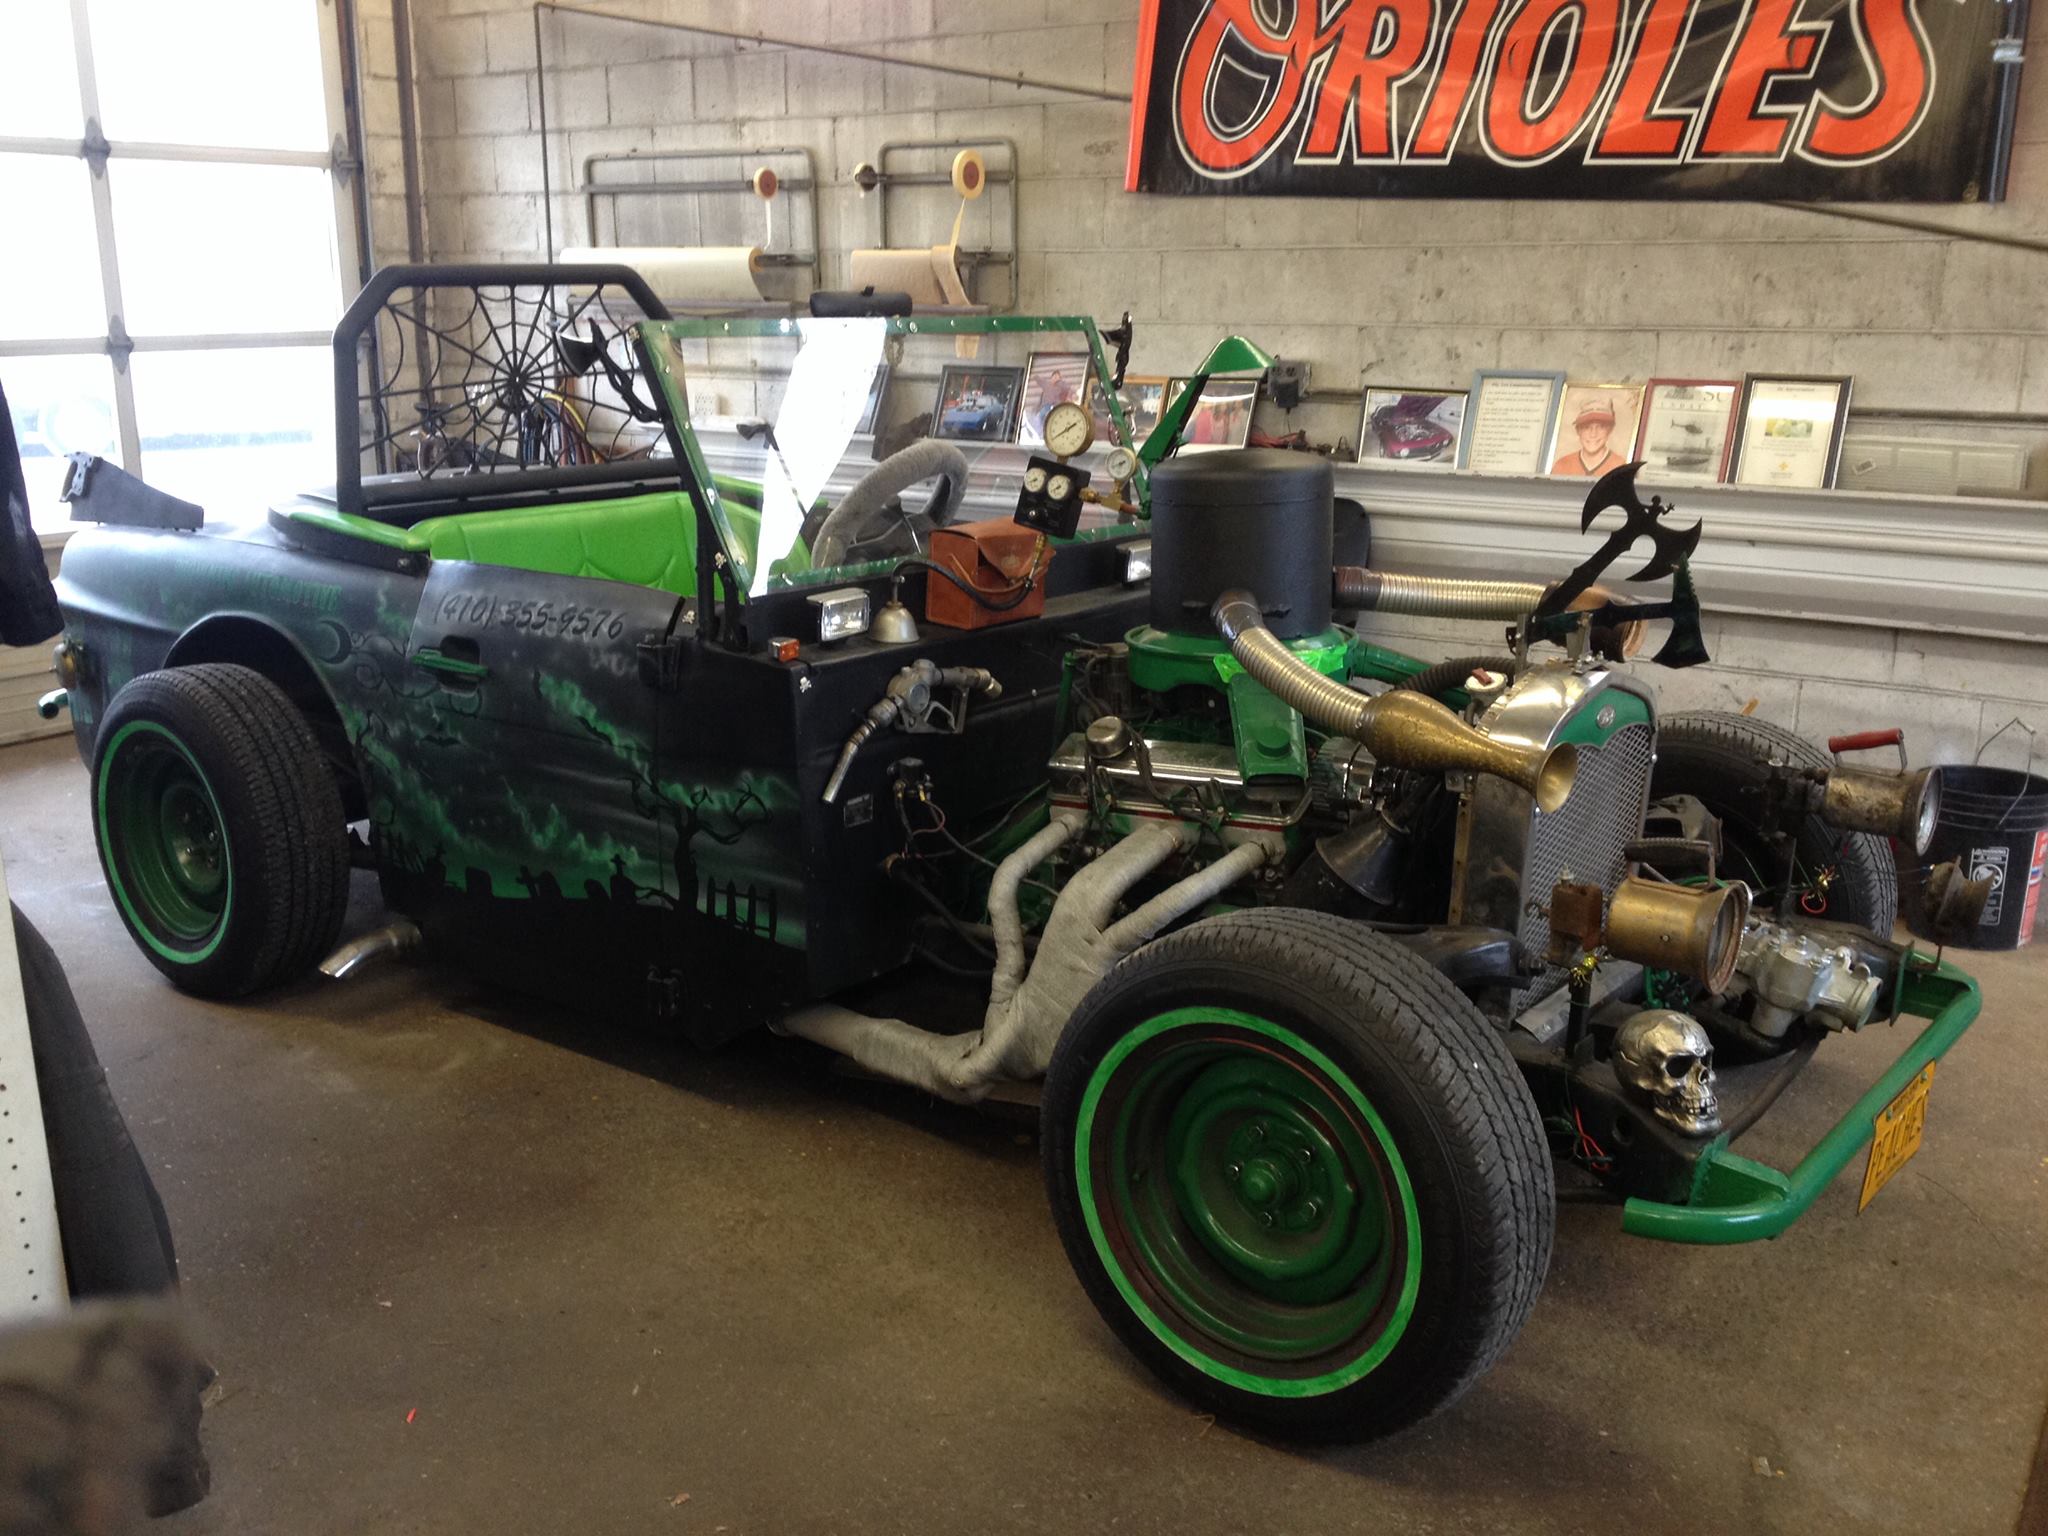 Green and Black Hot Rod